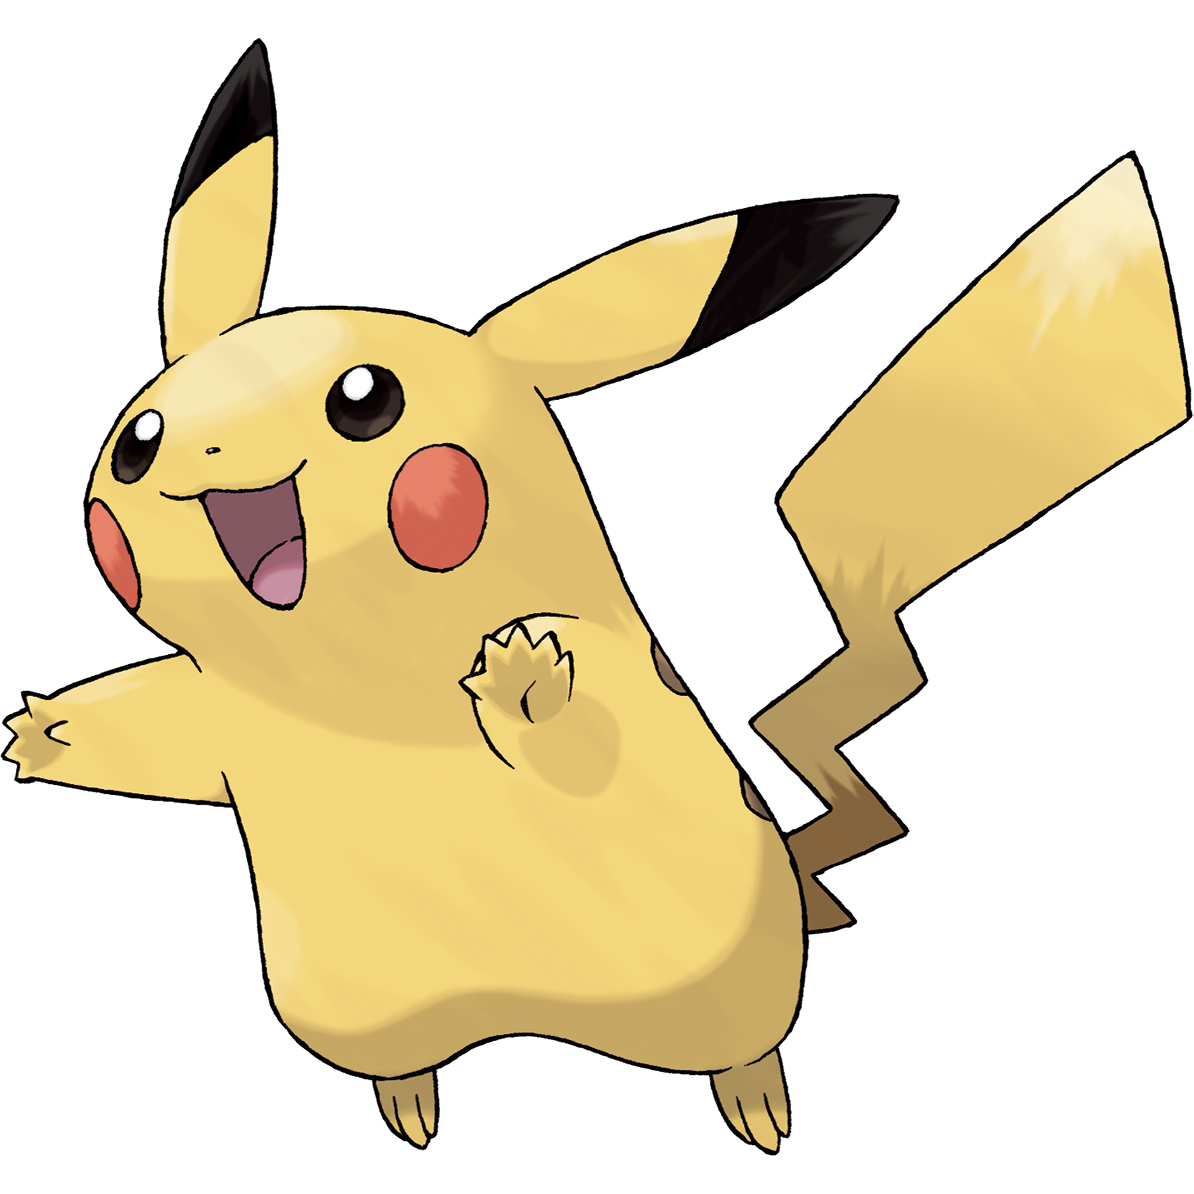 Surprised Pikachu PNG Clipart Background